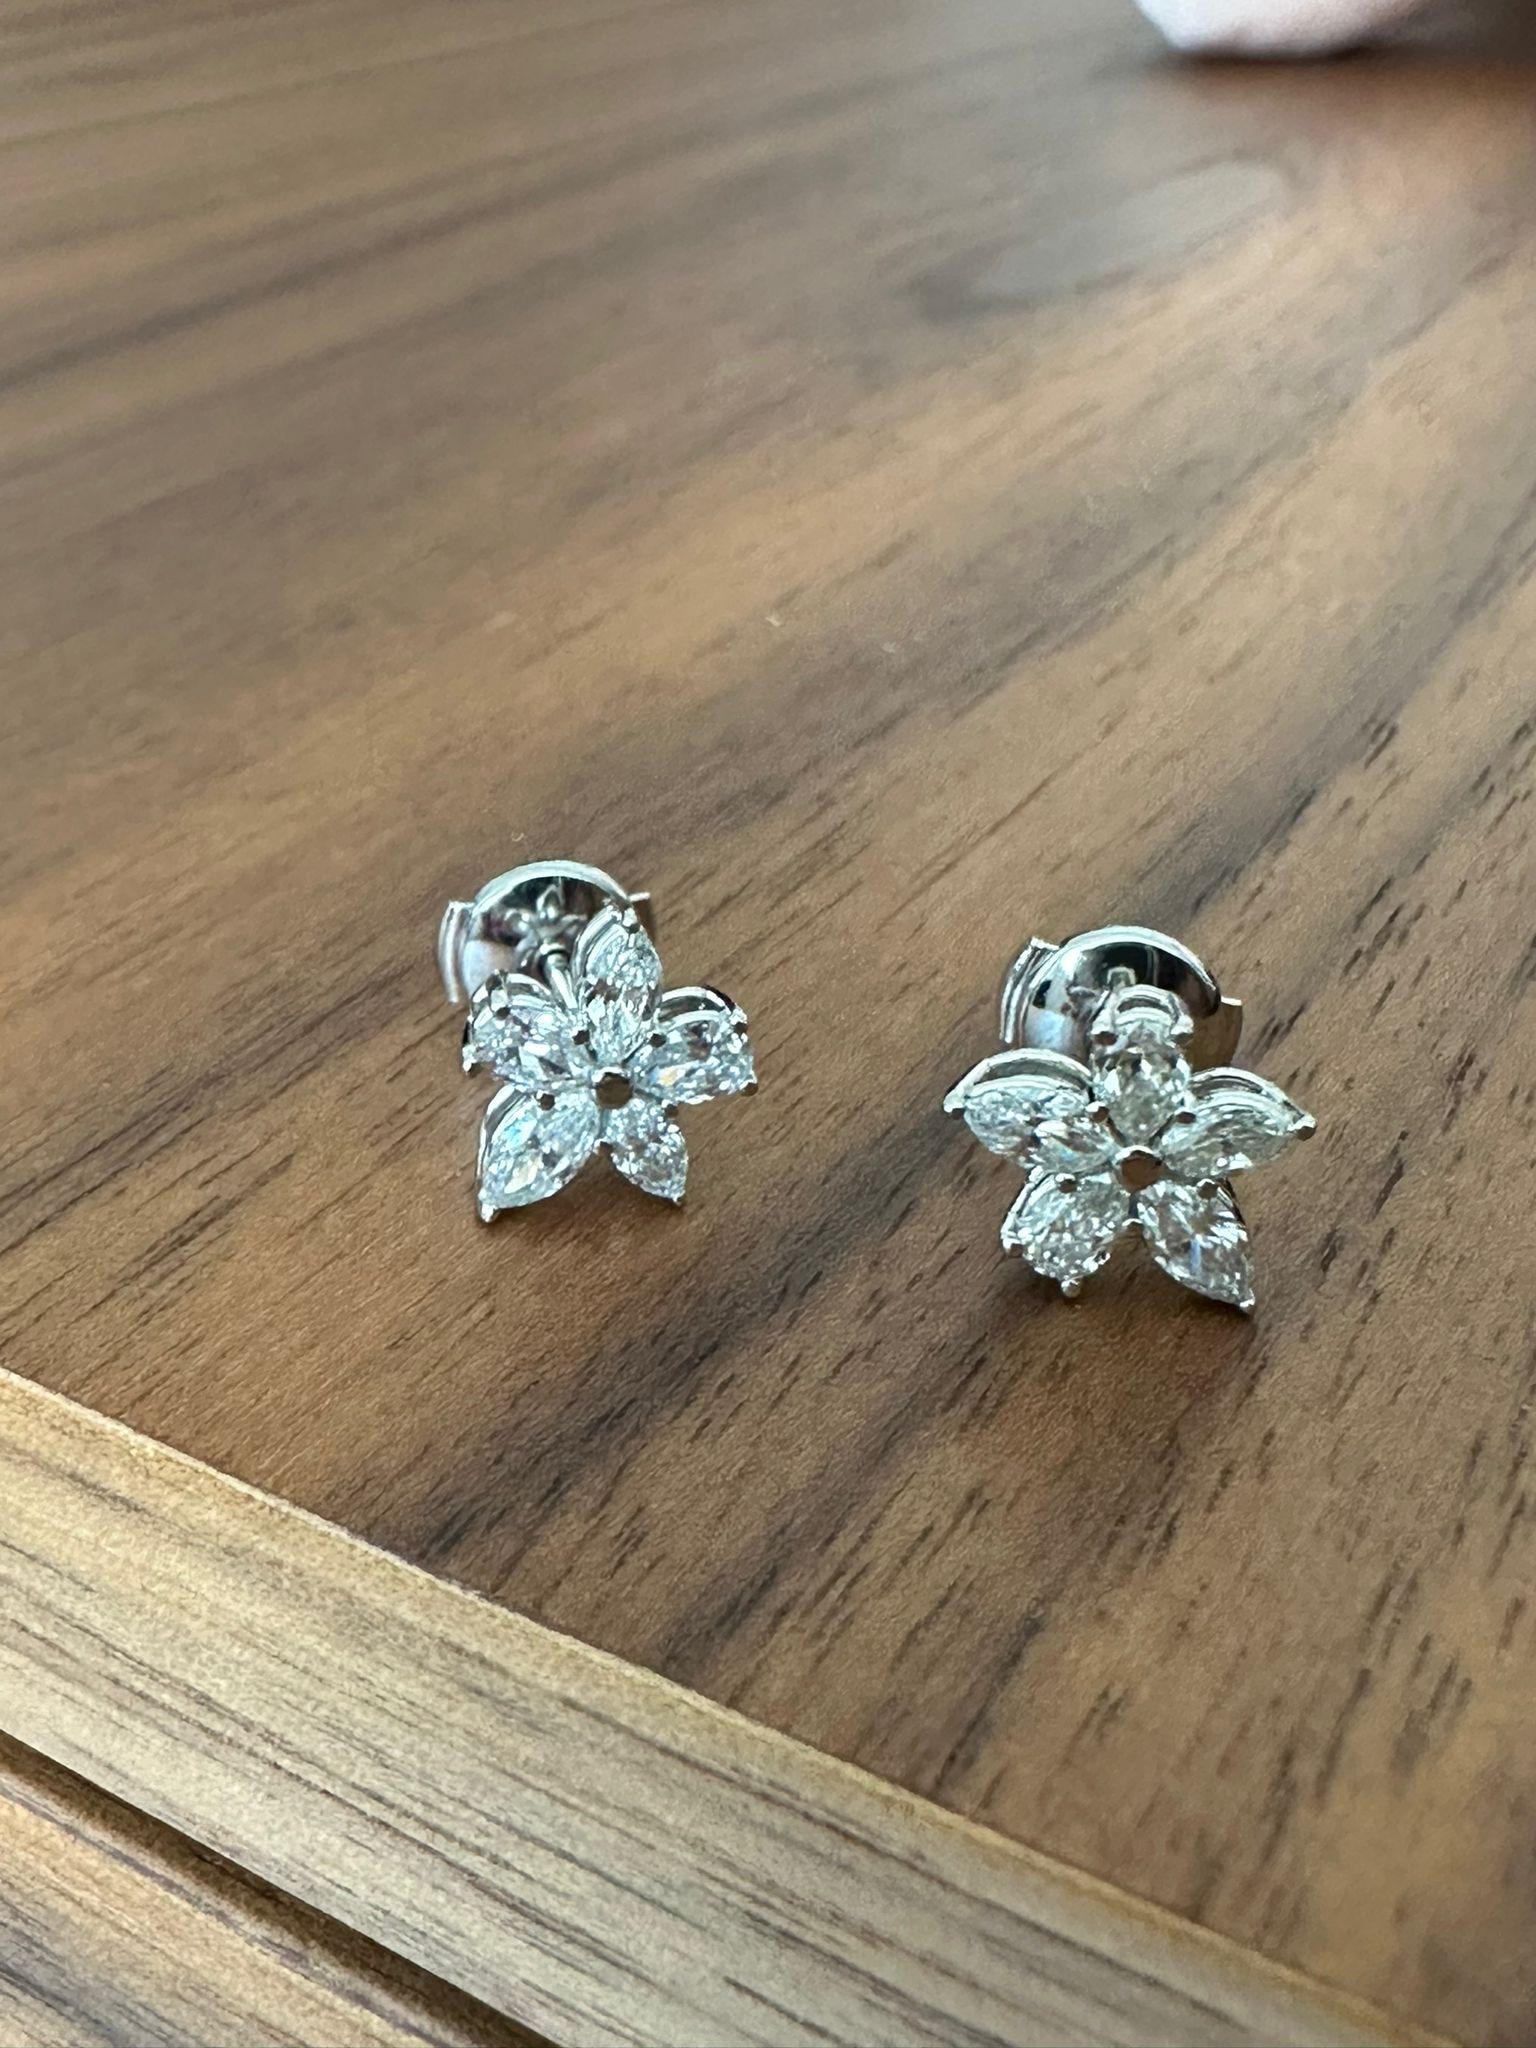 Pear Cut Tiffany & Co Victoria Mixed Cluster Earrings in Platinum , size medium